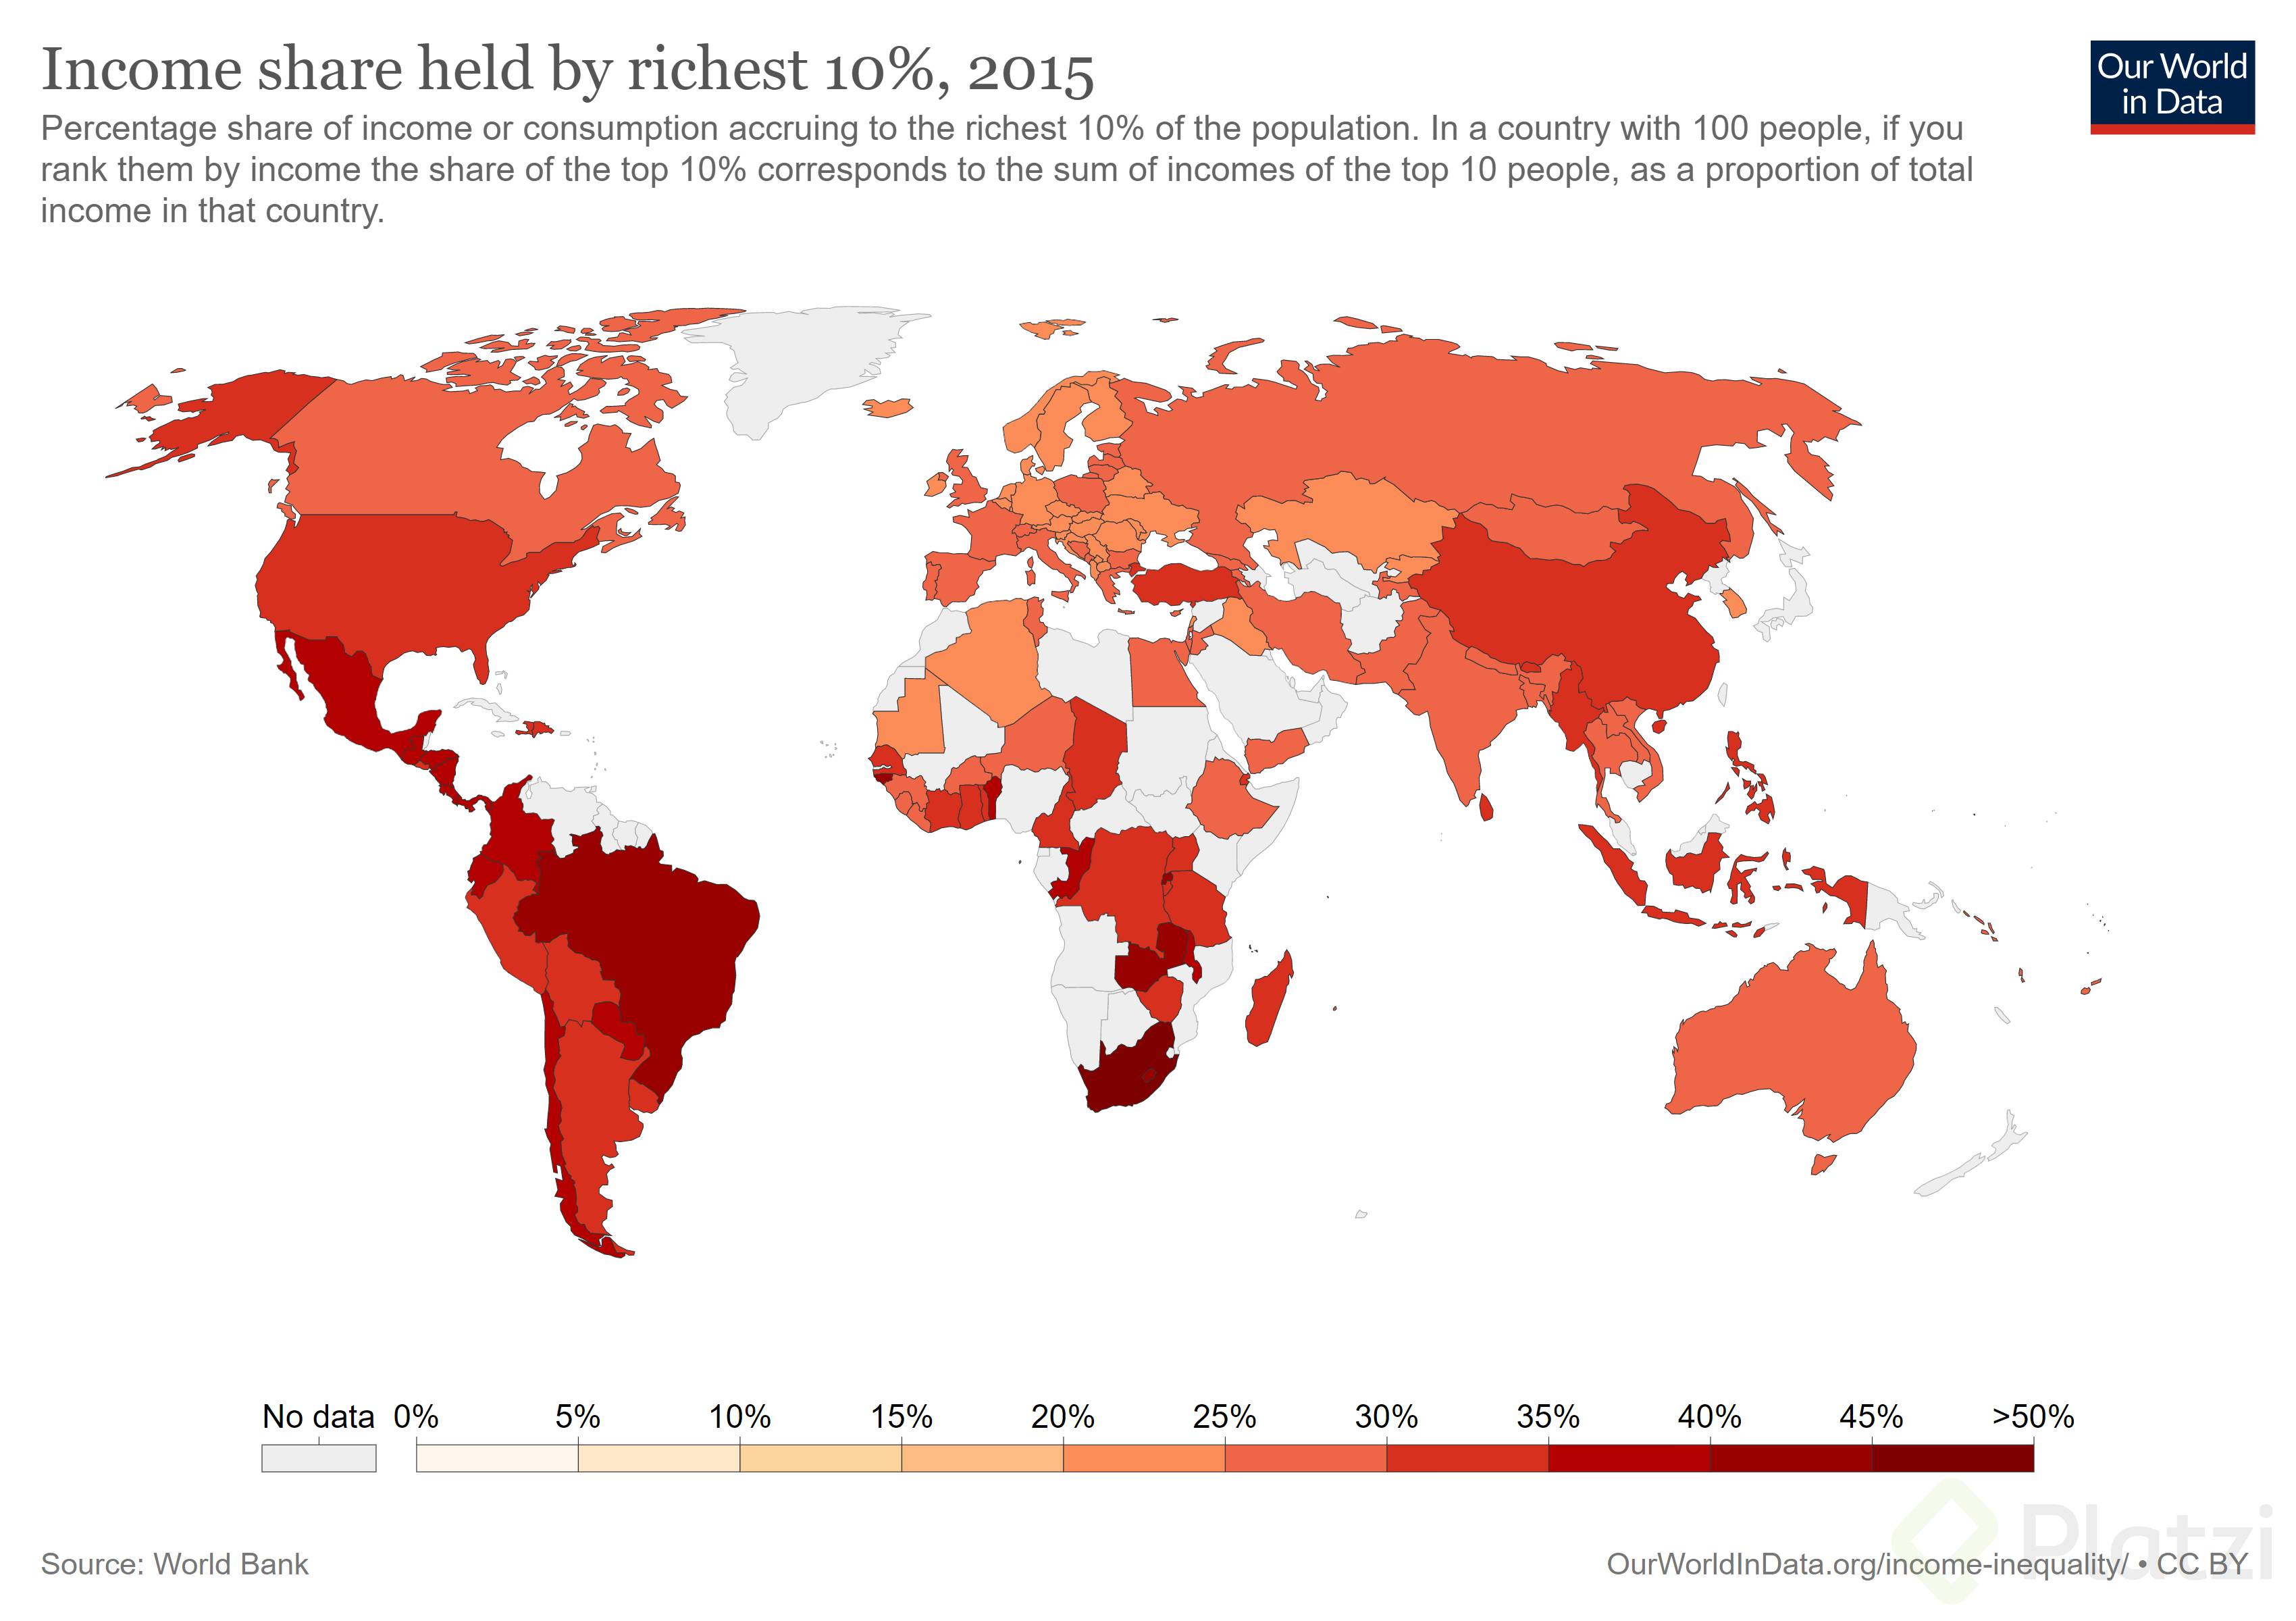 income-share-held-by-richest-10.png